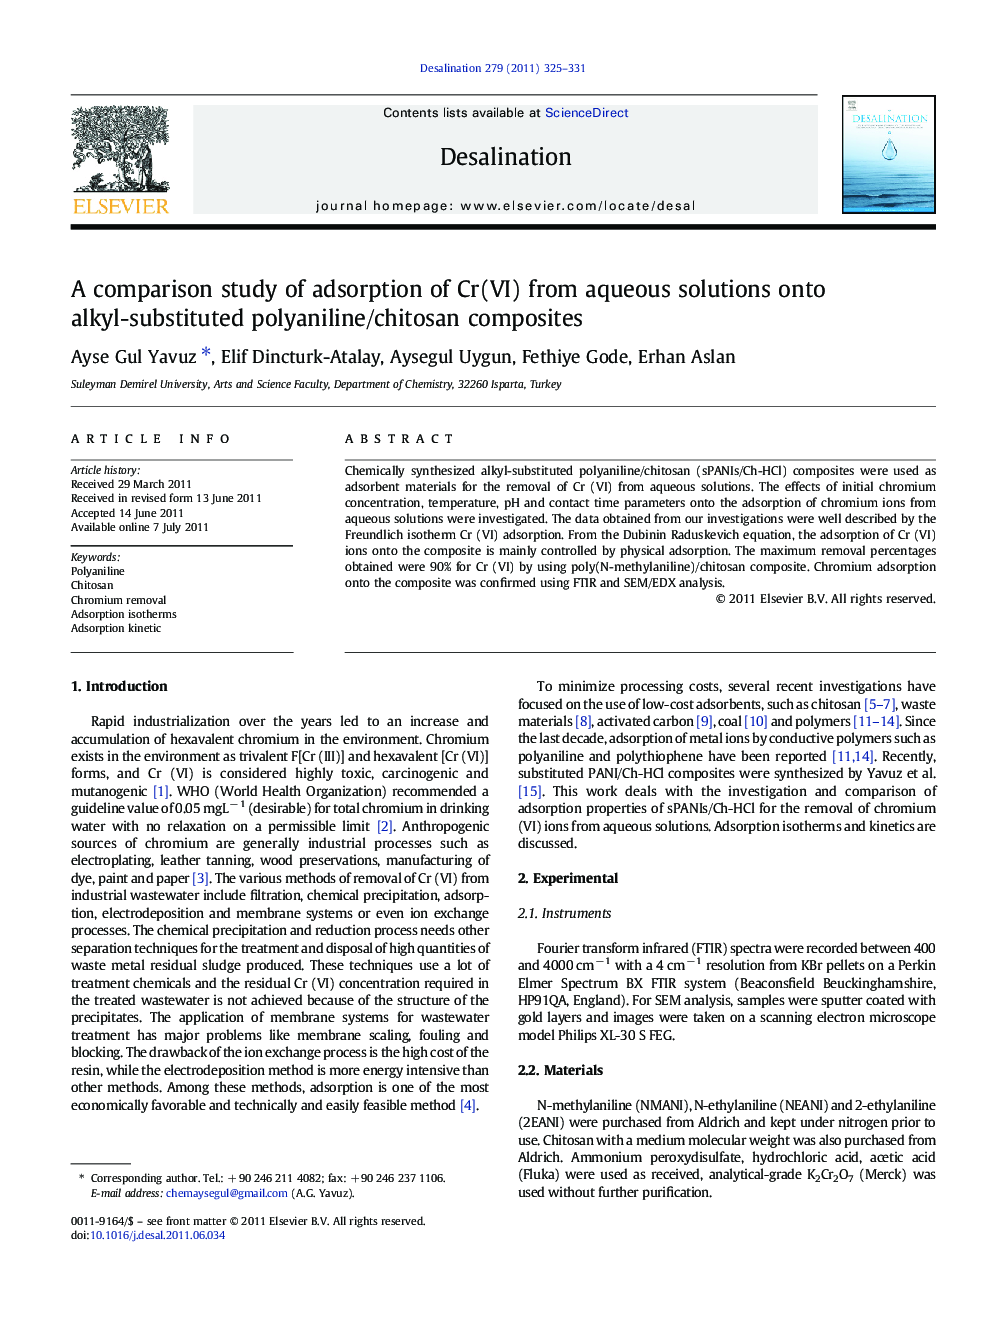 A comparison study of adsorption of Cr(VI) from aqueous solutions onto alkyl-substituted polyaniline/chitosan composites